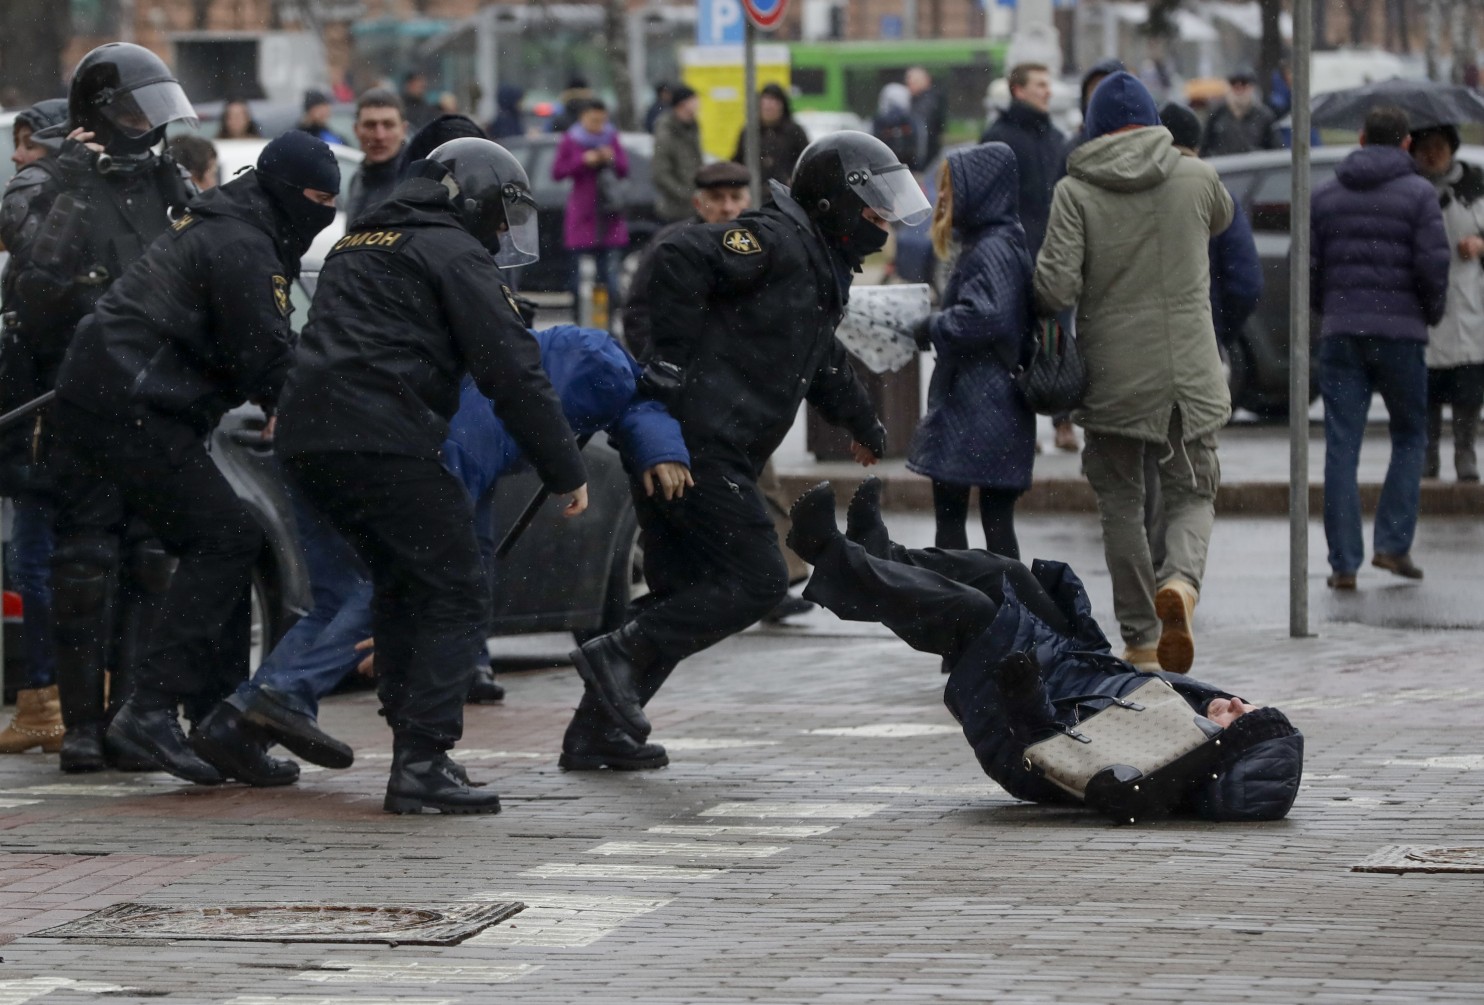 The Washington Post: Belarus police arrest over 400 protesters; many are beaten